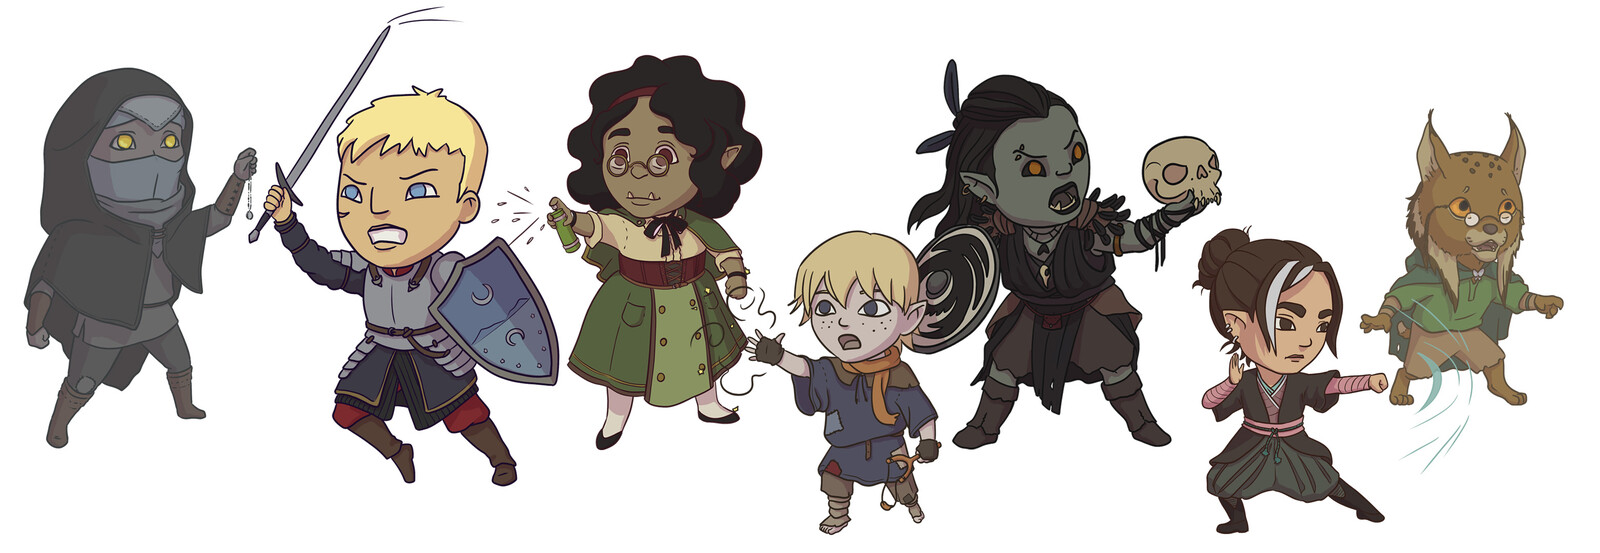 Curse of Strahd characters from ExitoCriticoRol